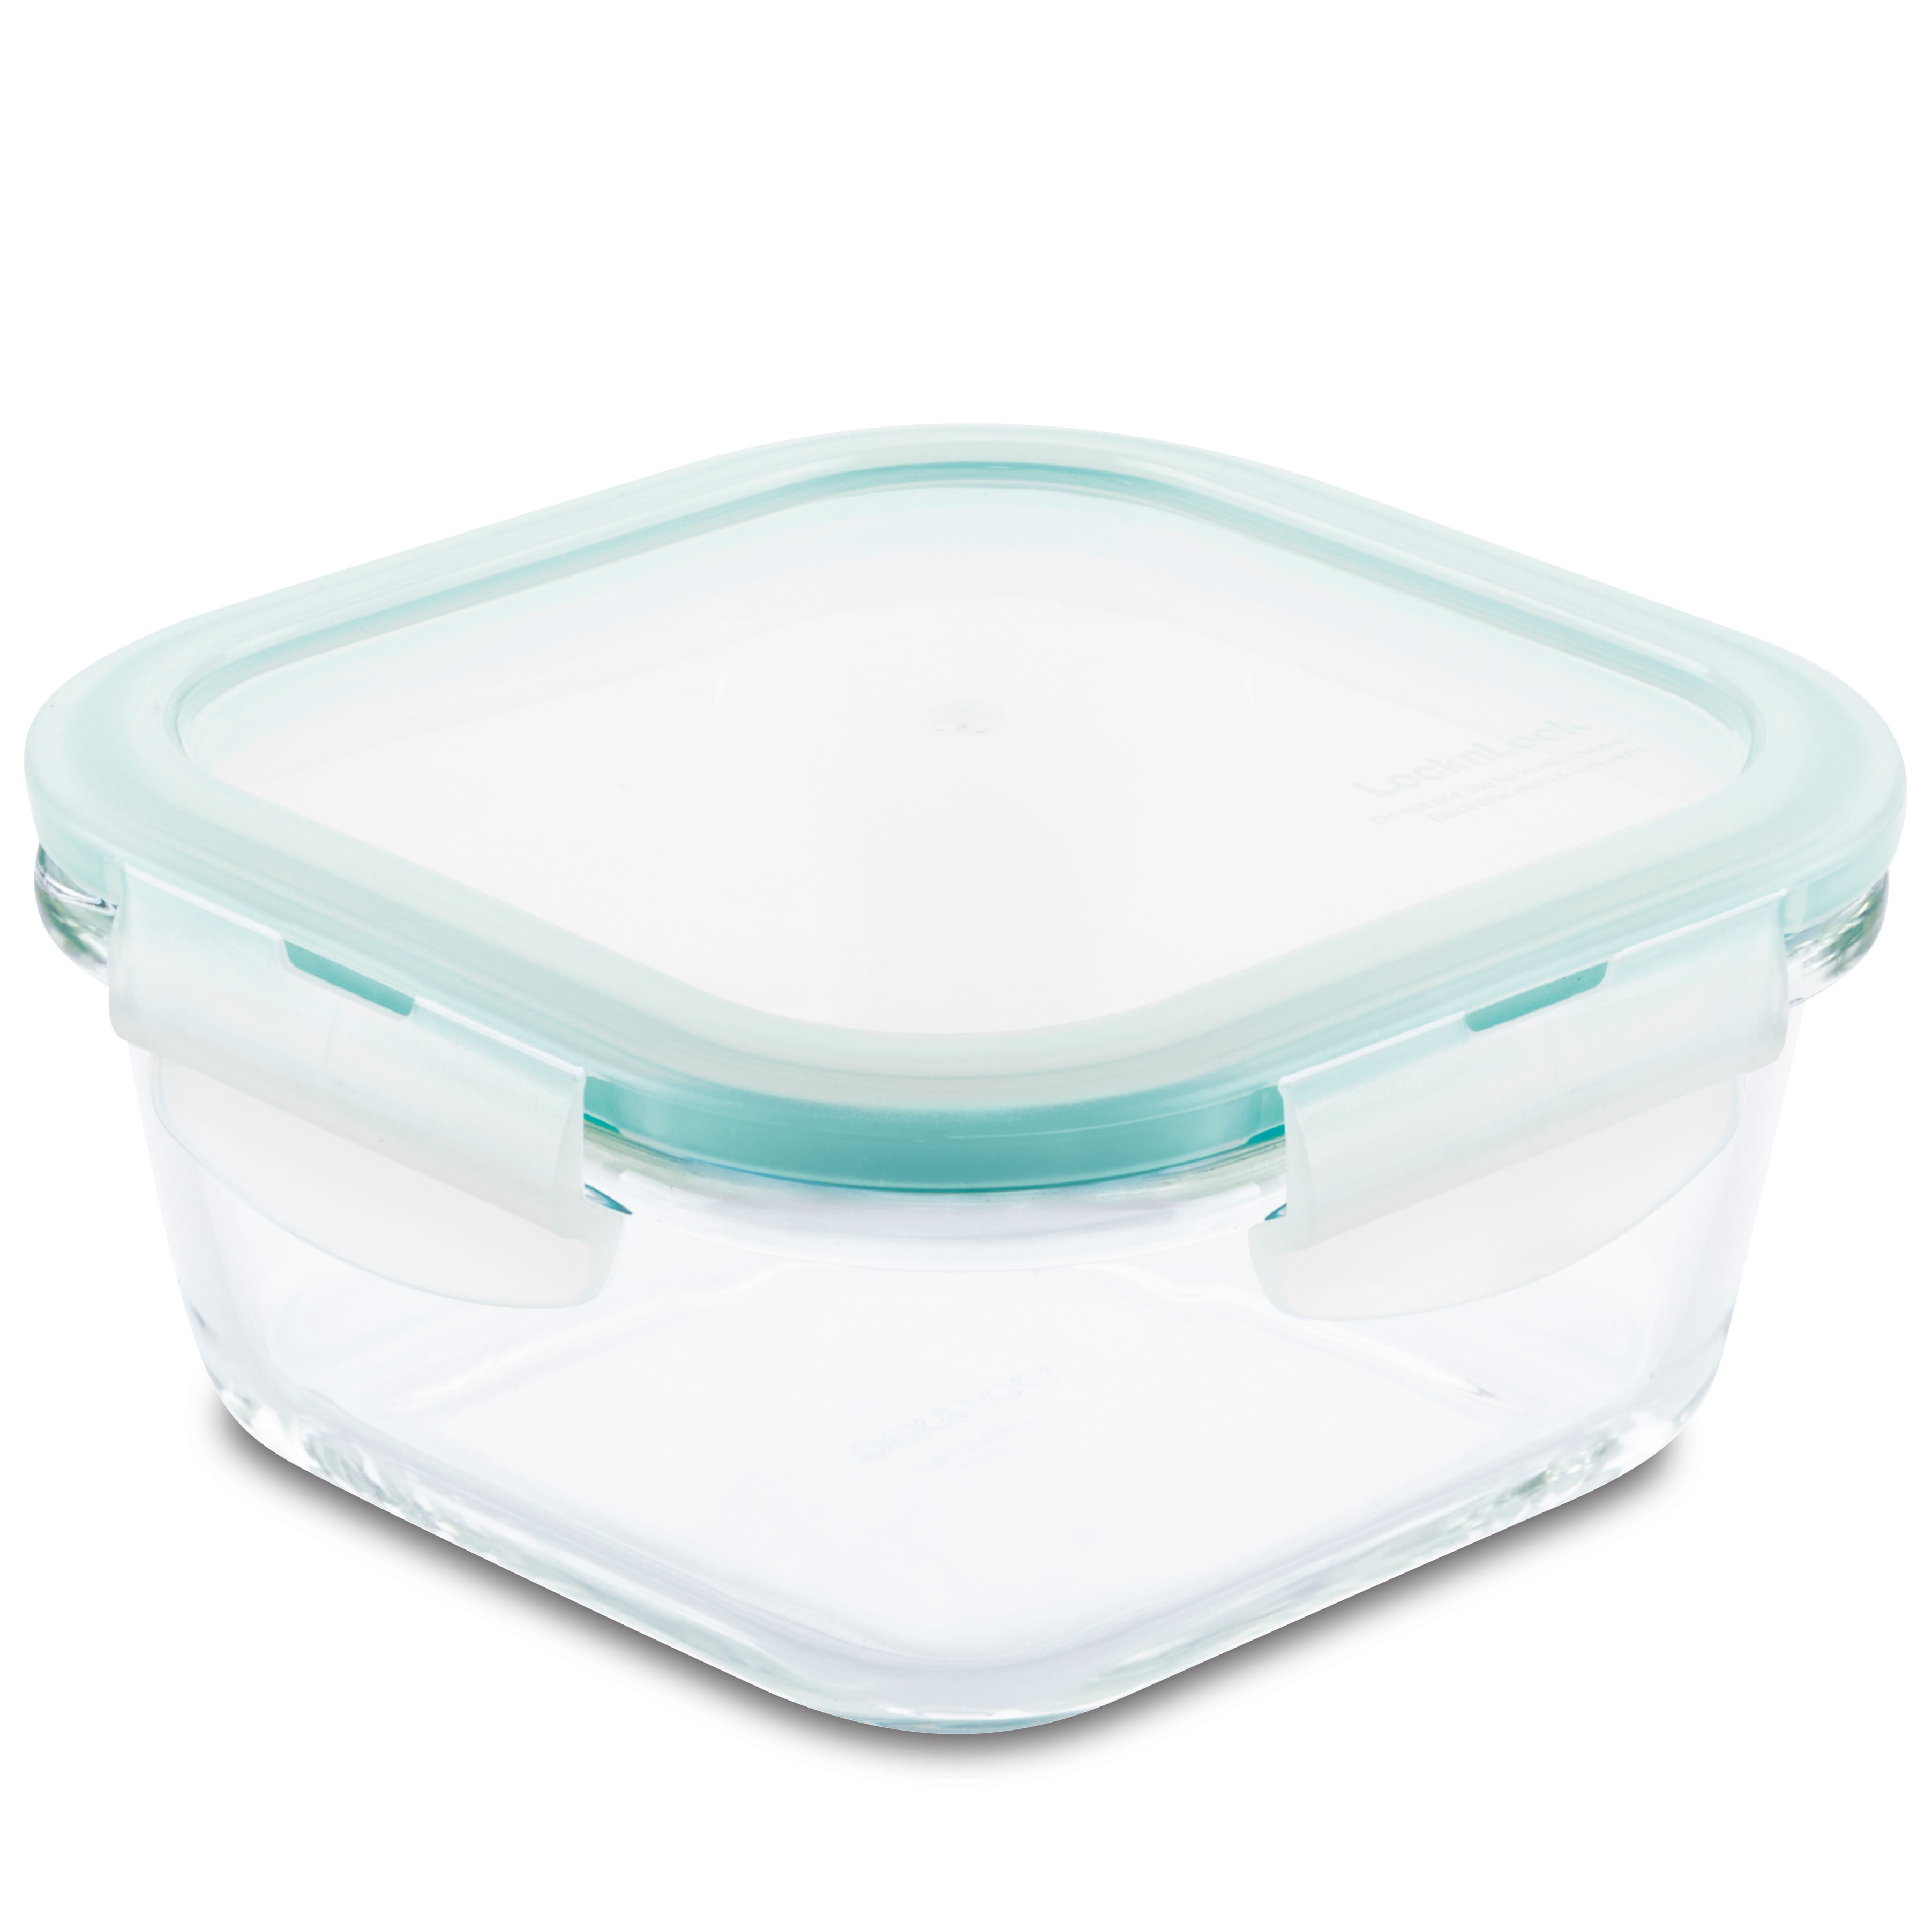 21pk Clear Plastic Airtight Food Storage Containers Set with Lids,Kitchen/ Pantry